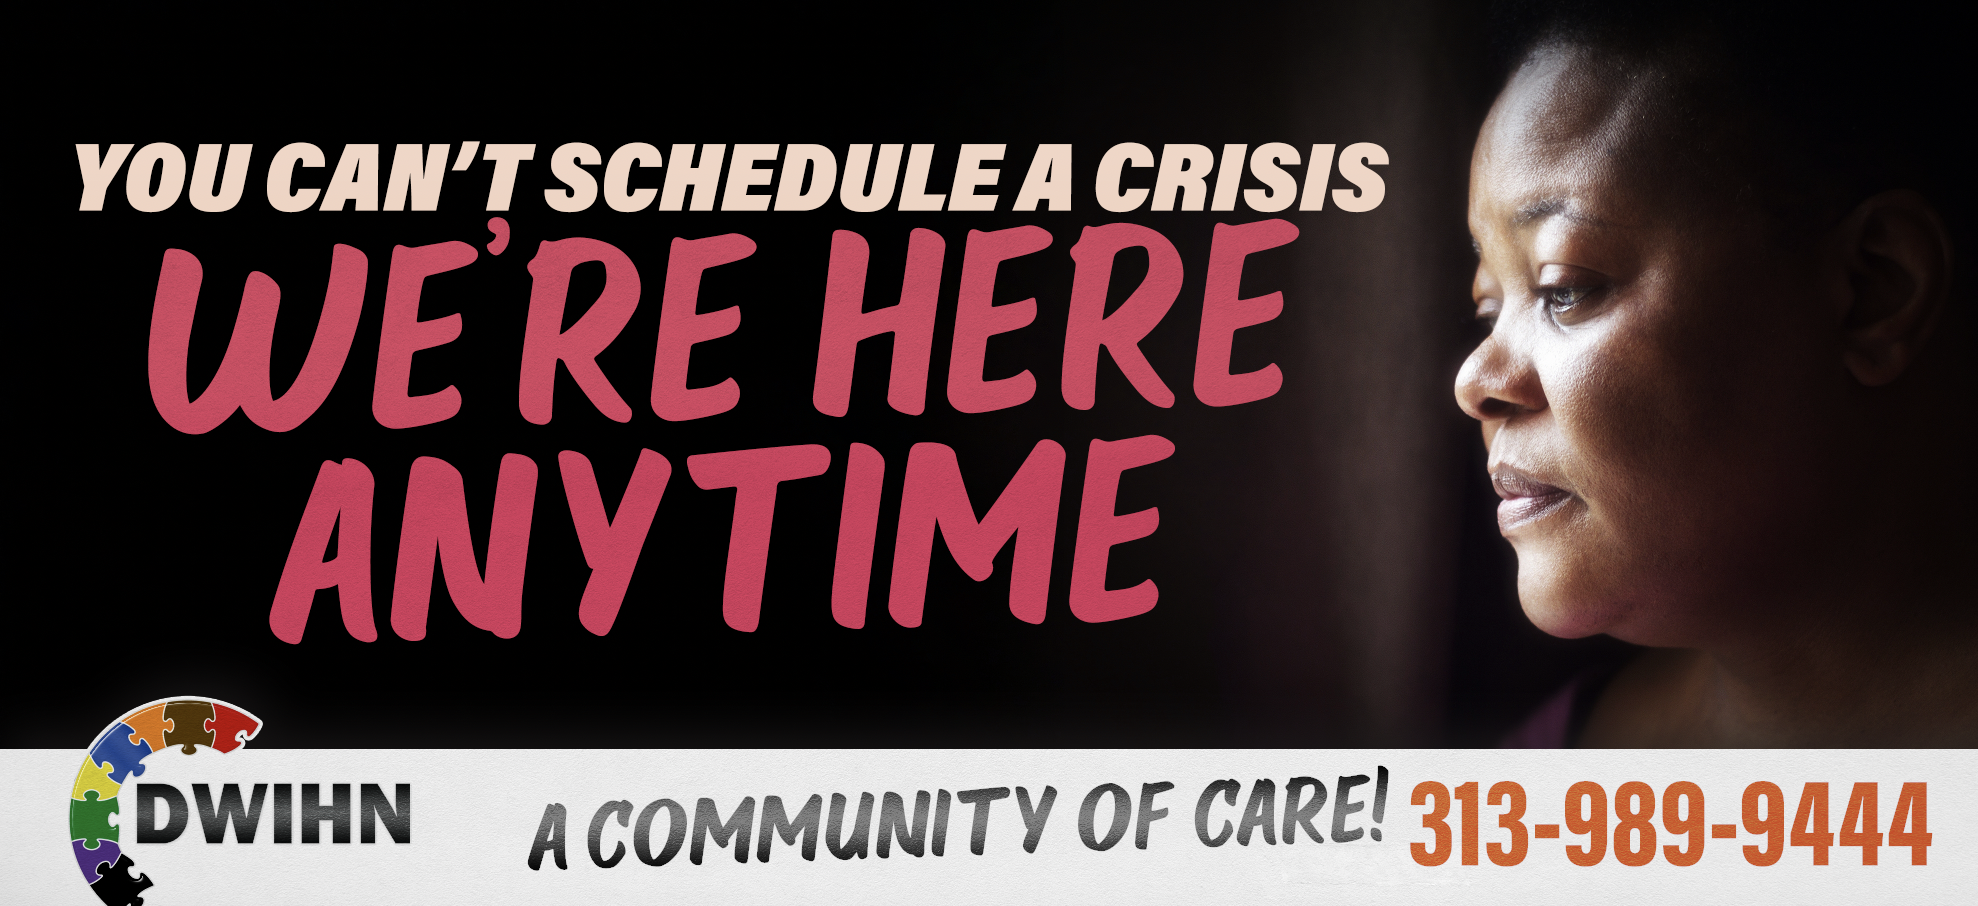 Coming Soon - Crisis Care Centers